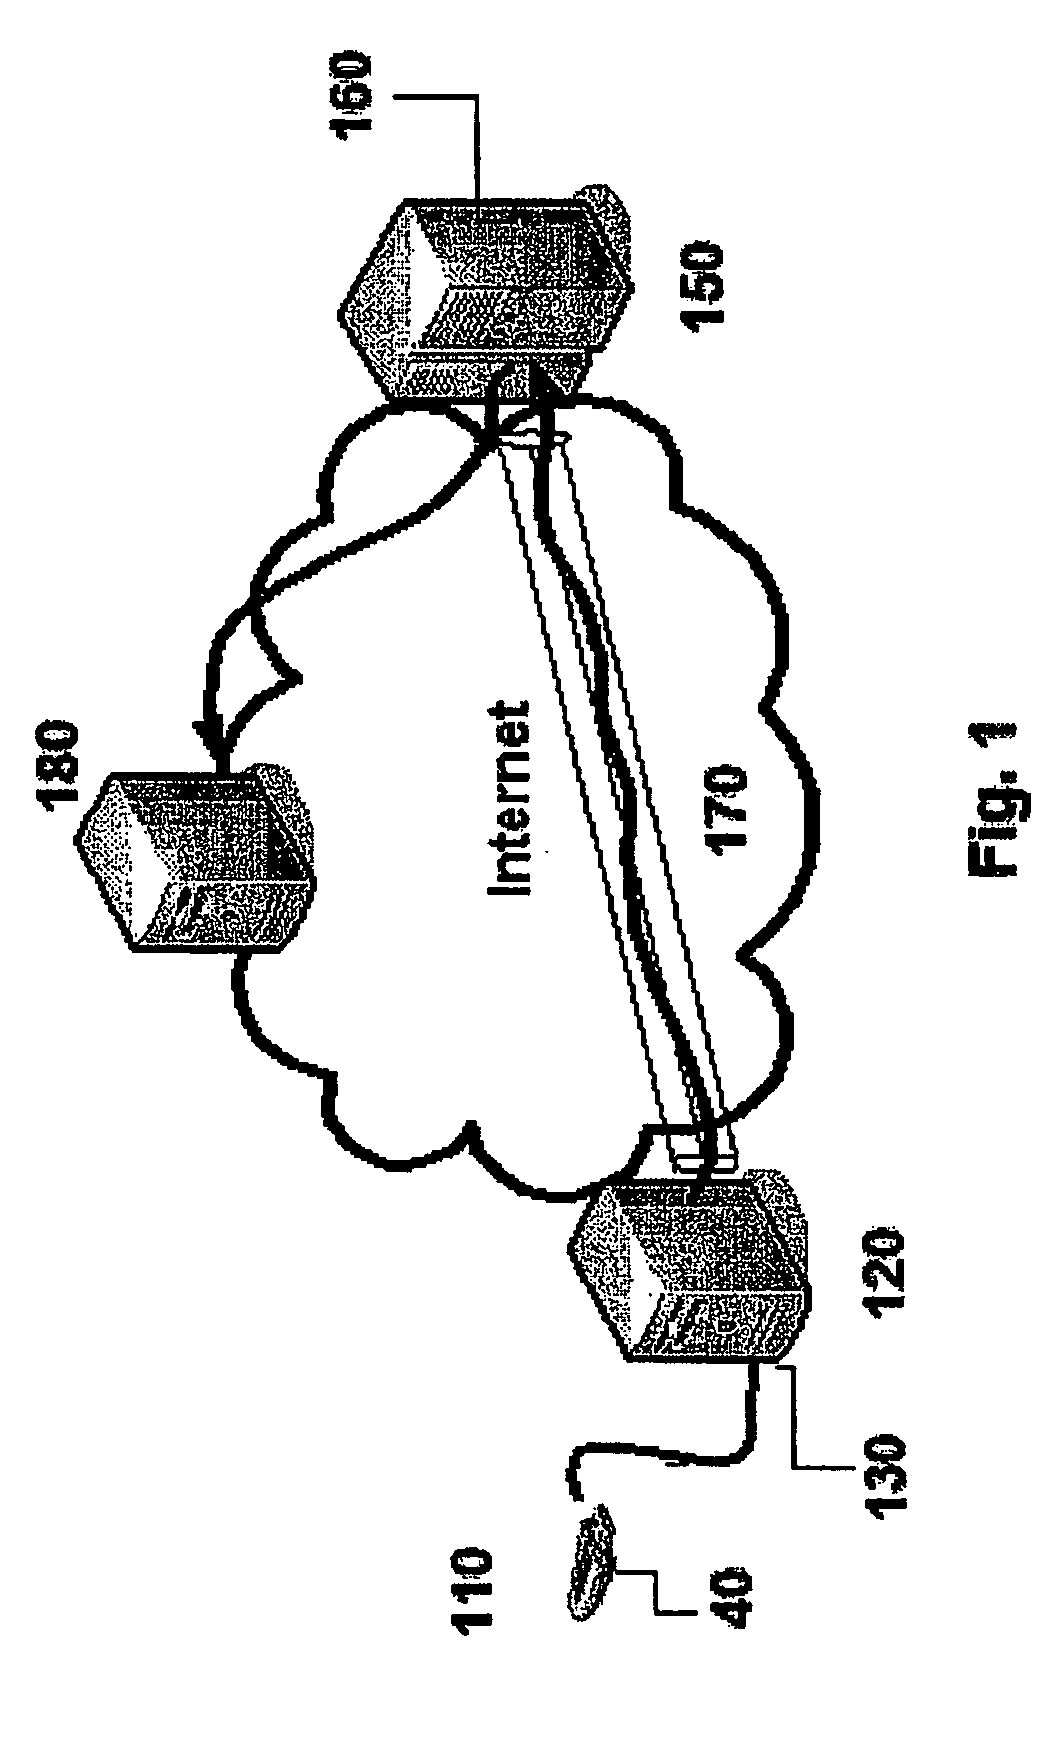 Apparatus, system, and method for authenticating users of digital communication devices